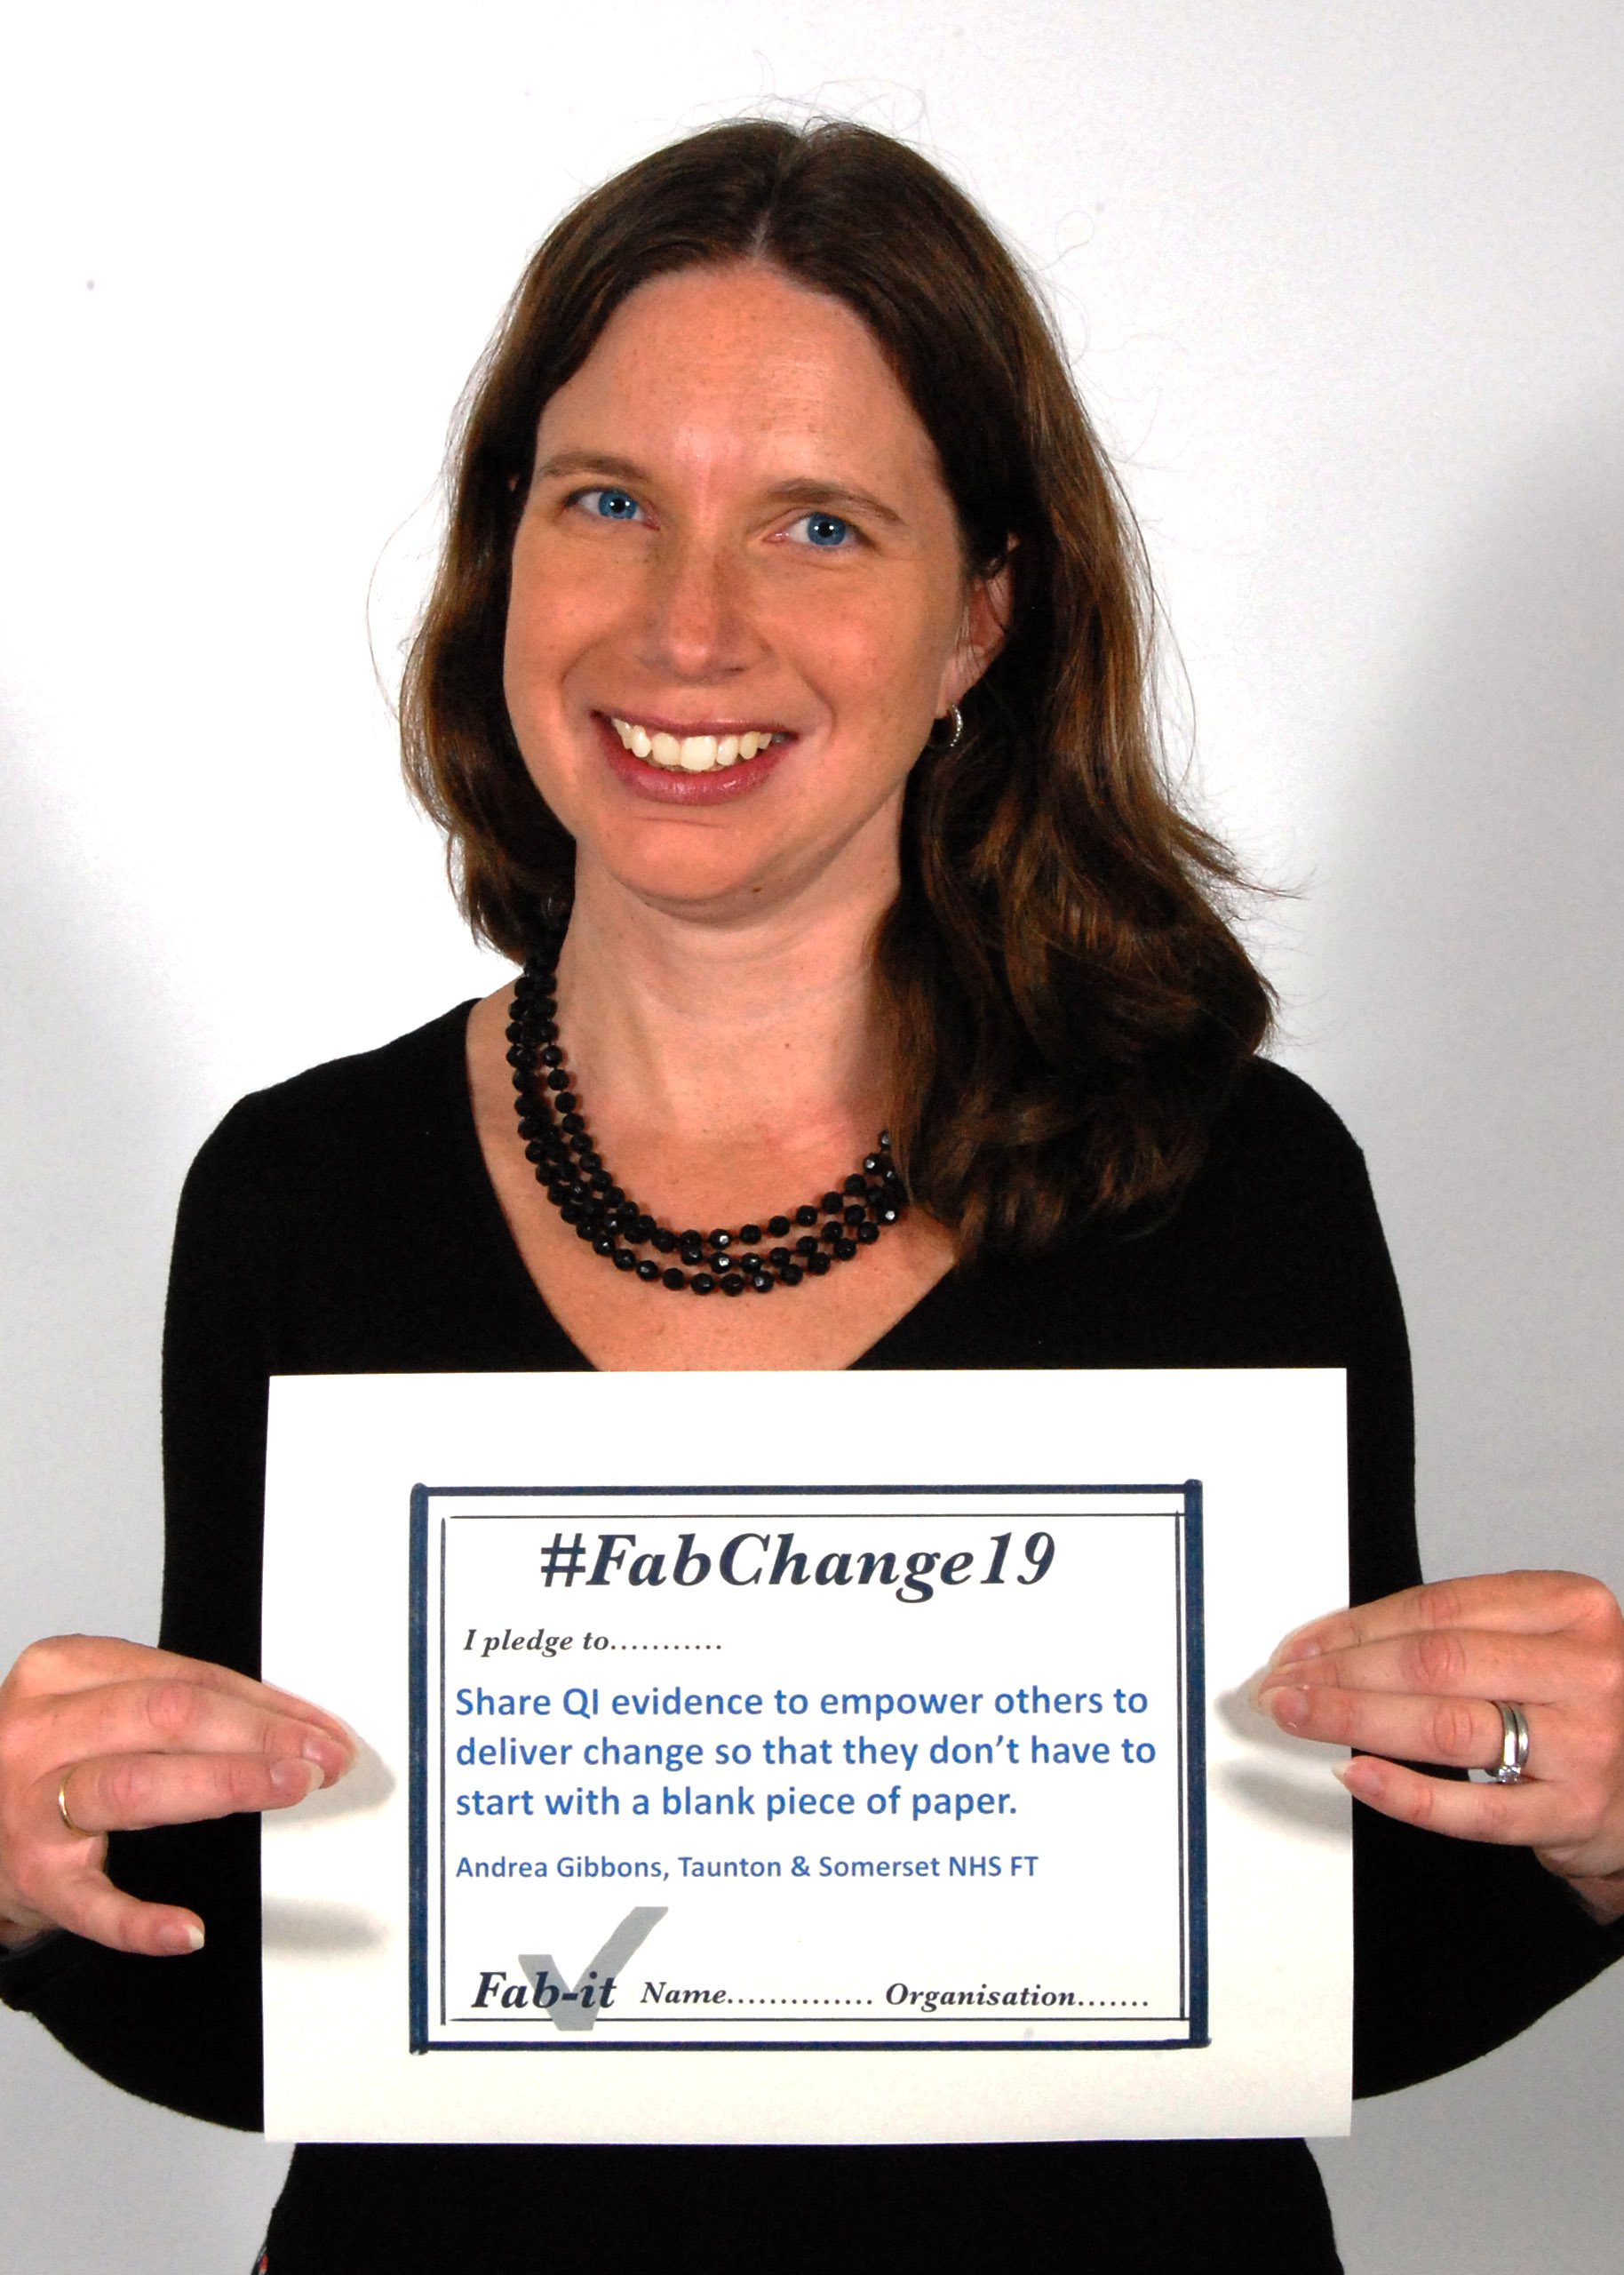 #FabChange19 Pledge To share QI evidence to empower others to deliver change featured image